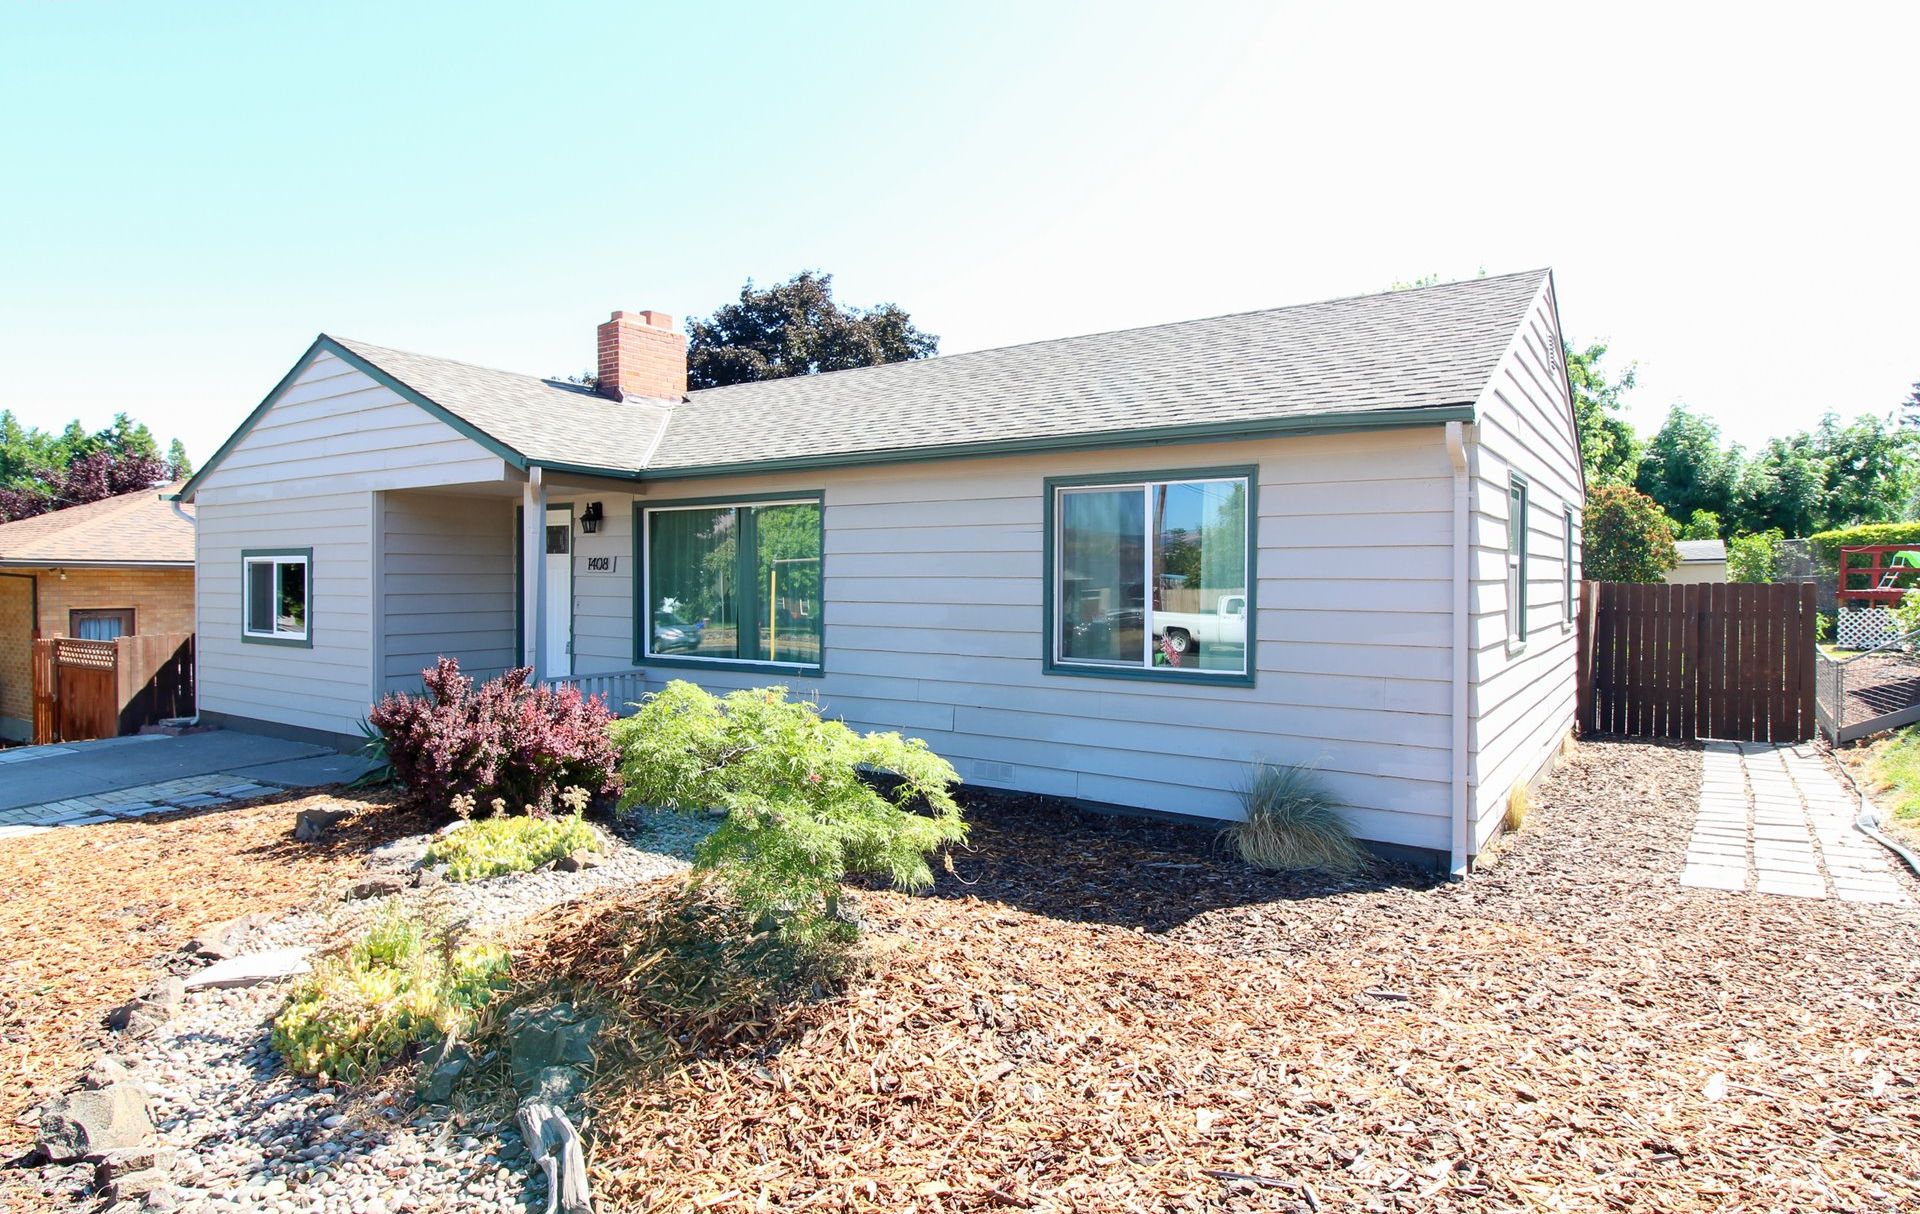 1408 Dry Hollow Rd The Dalles Price Drop